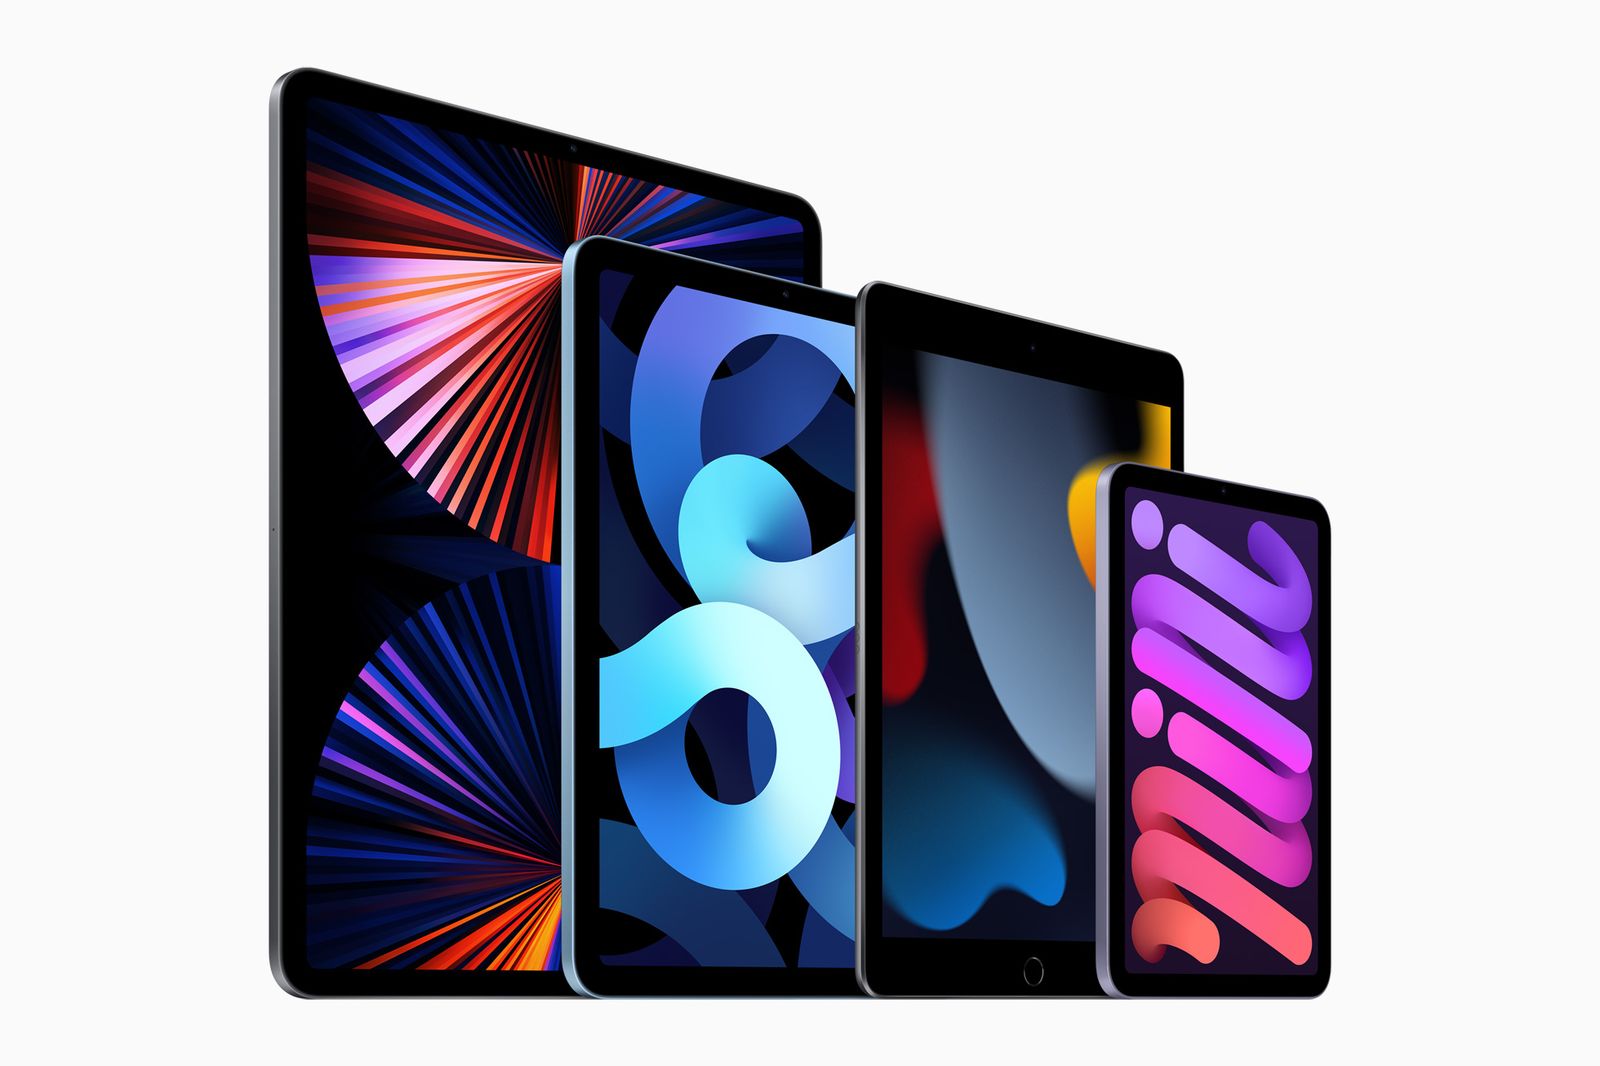 The new iPads 2022 are expected to arrive on October 25 or 26